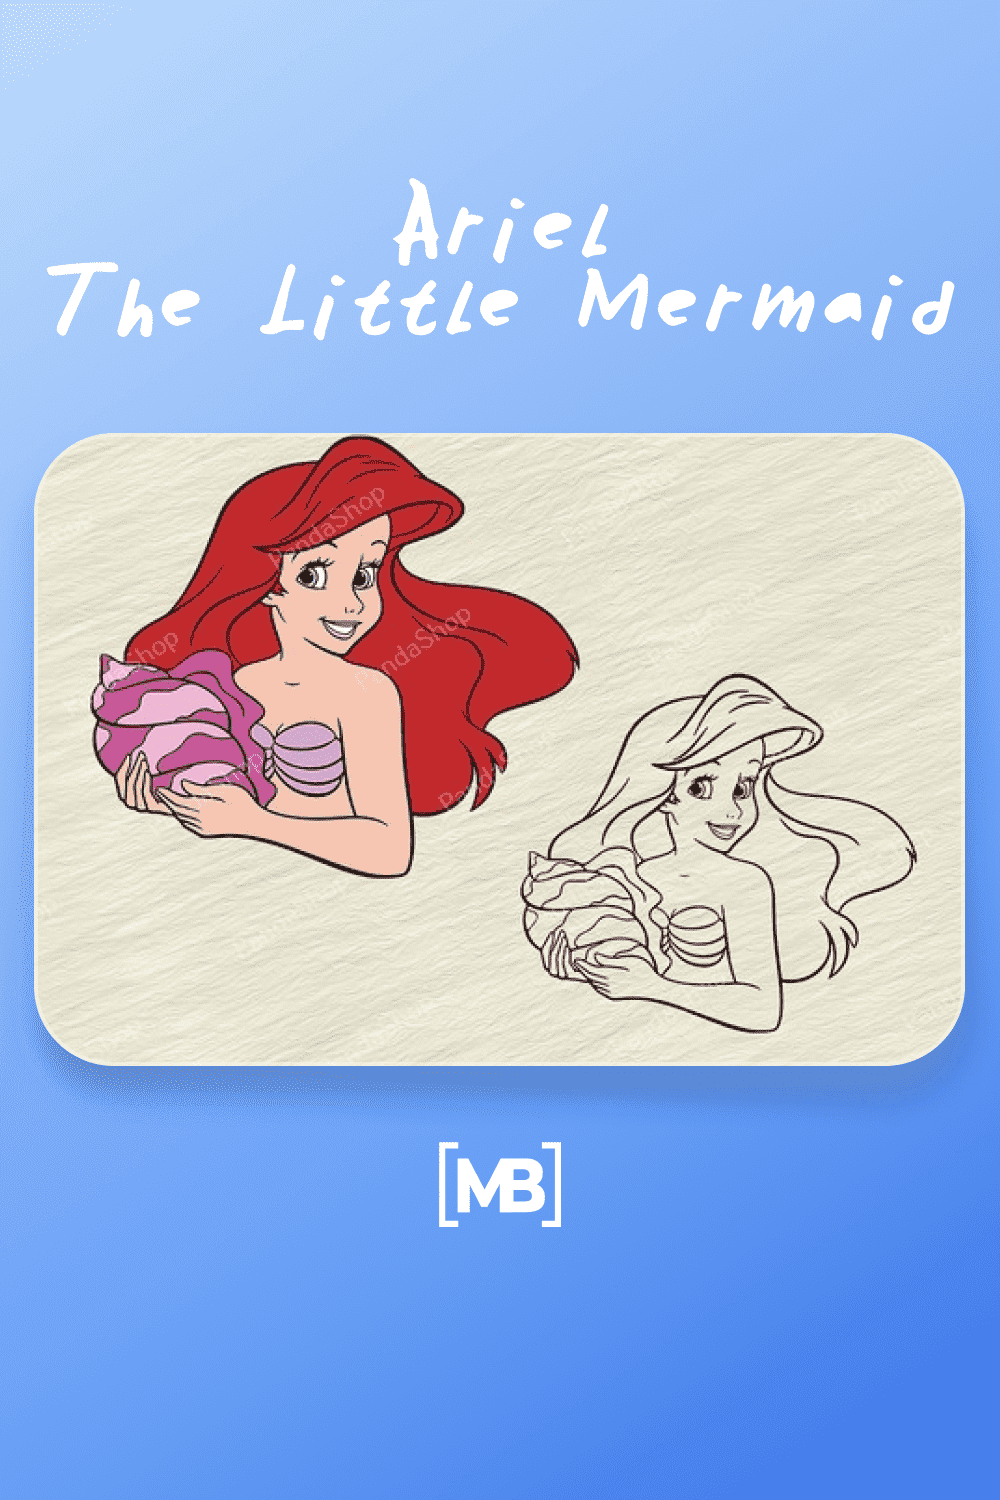 Ariel -The Little Mermaid, Svg, Dxf, Eps,Png, Cricut, Cutting file.